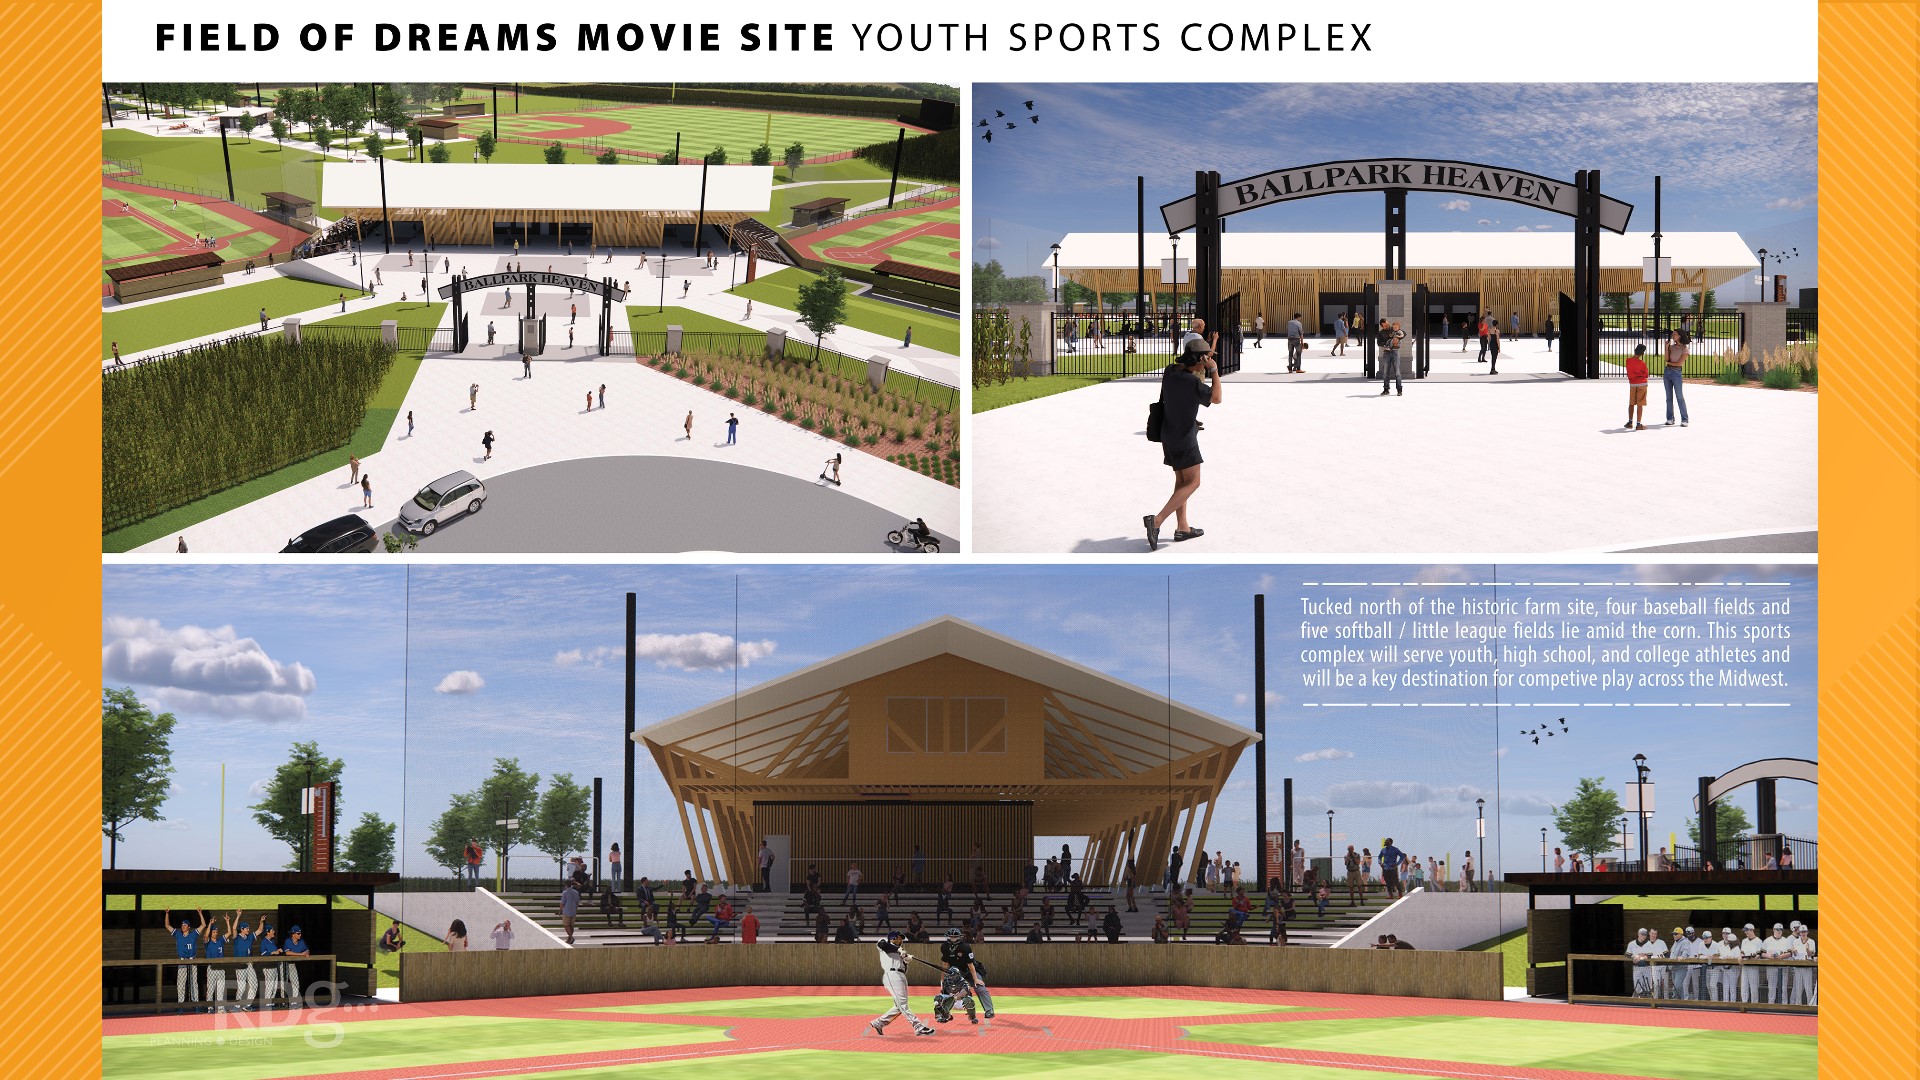 The movie site's ownership unveiled plans for nine new ballfields, dormitories for teams and a boutique hotel — all expected to be completed in phases by 2023.